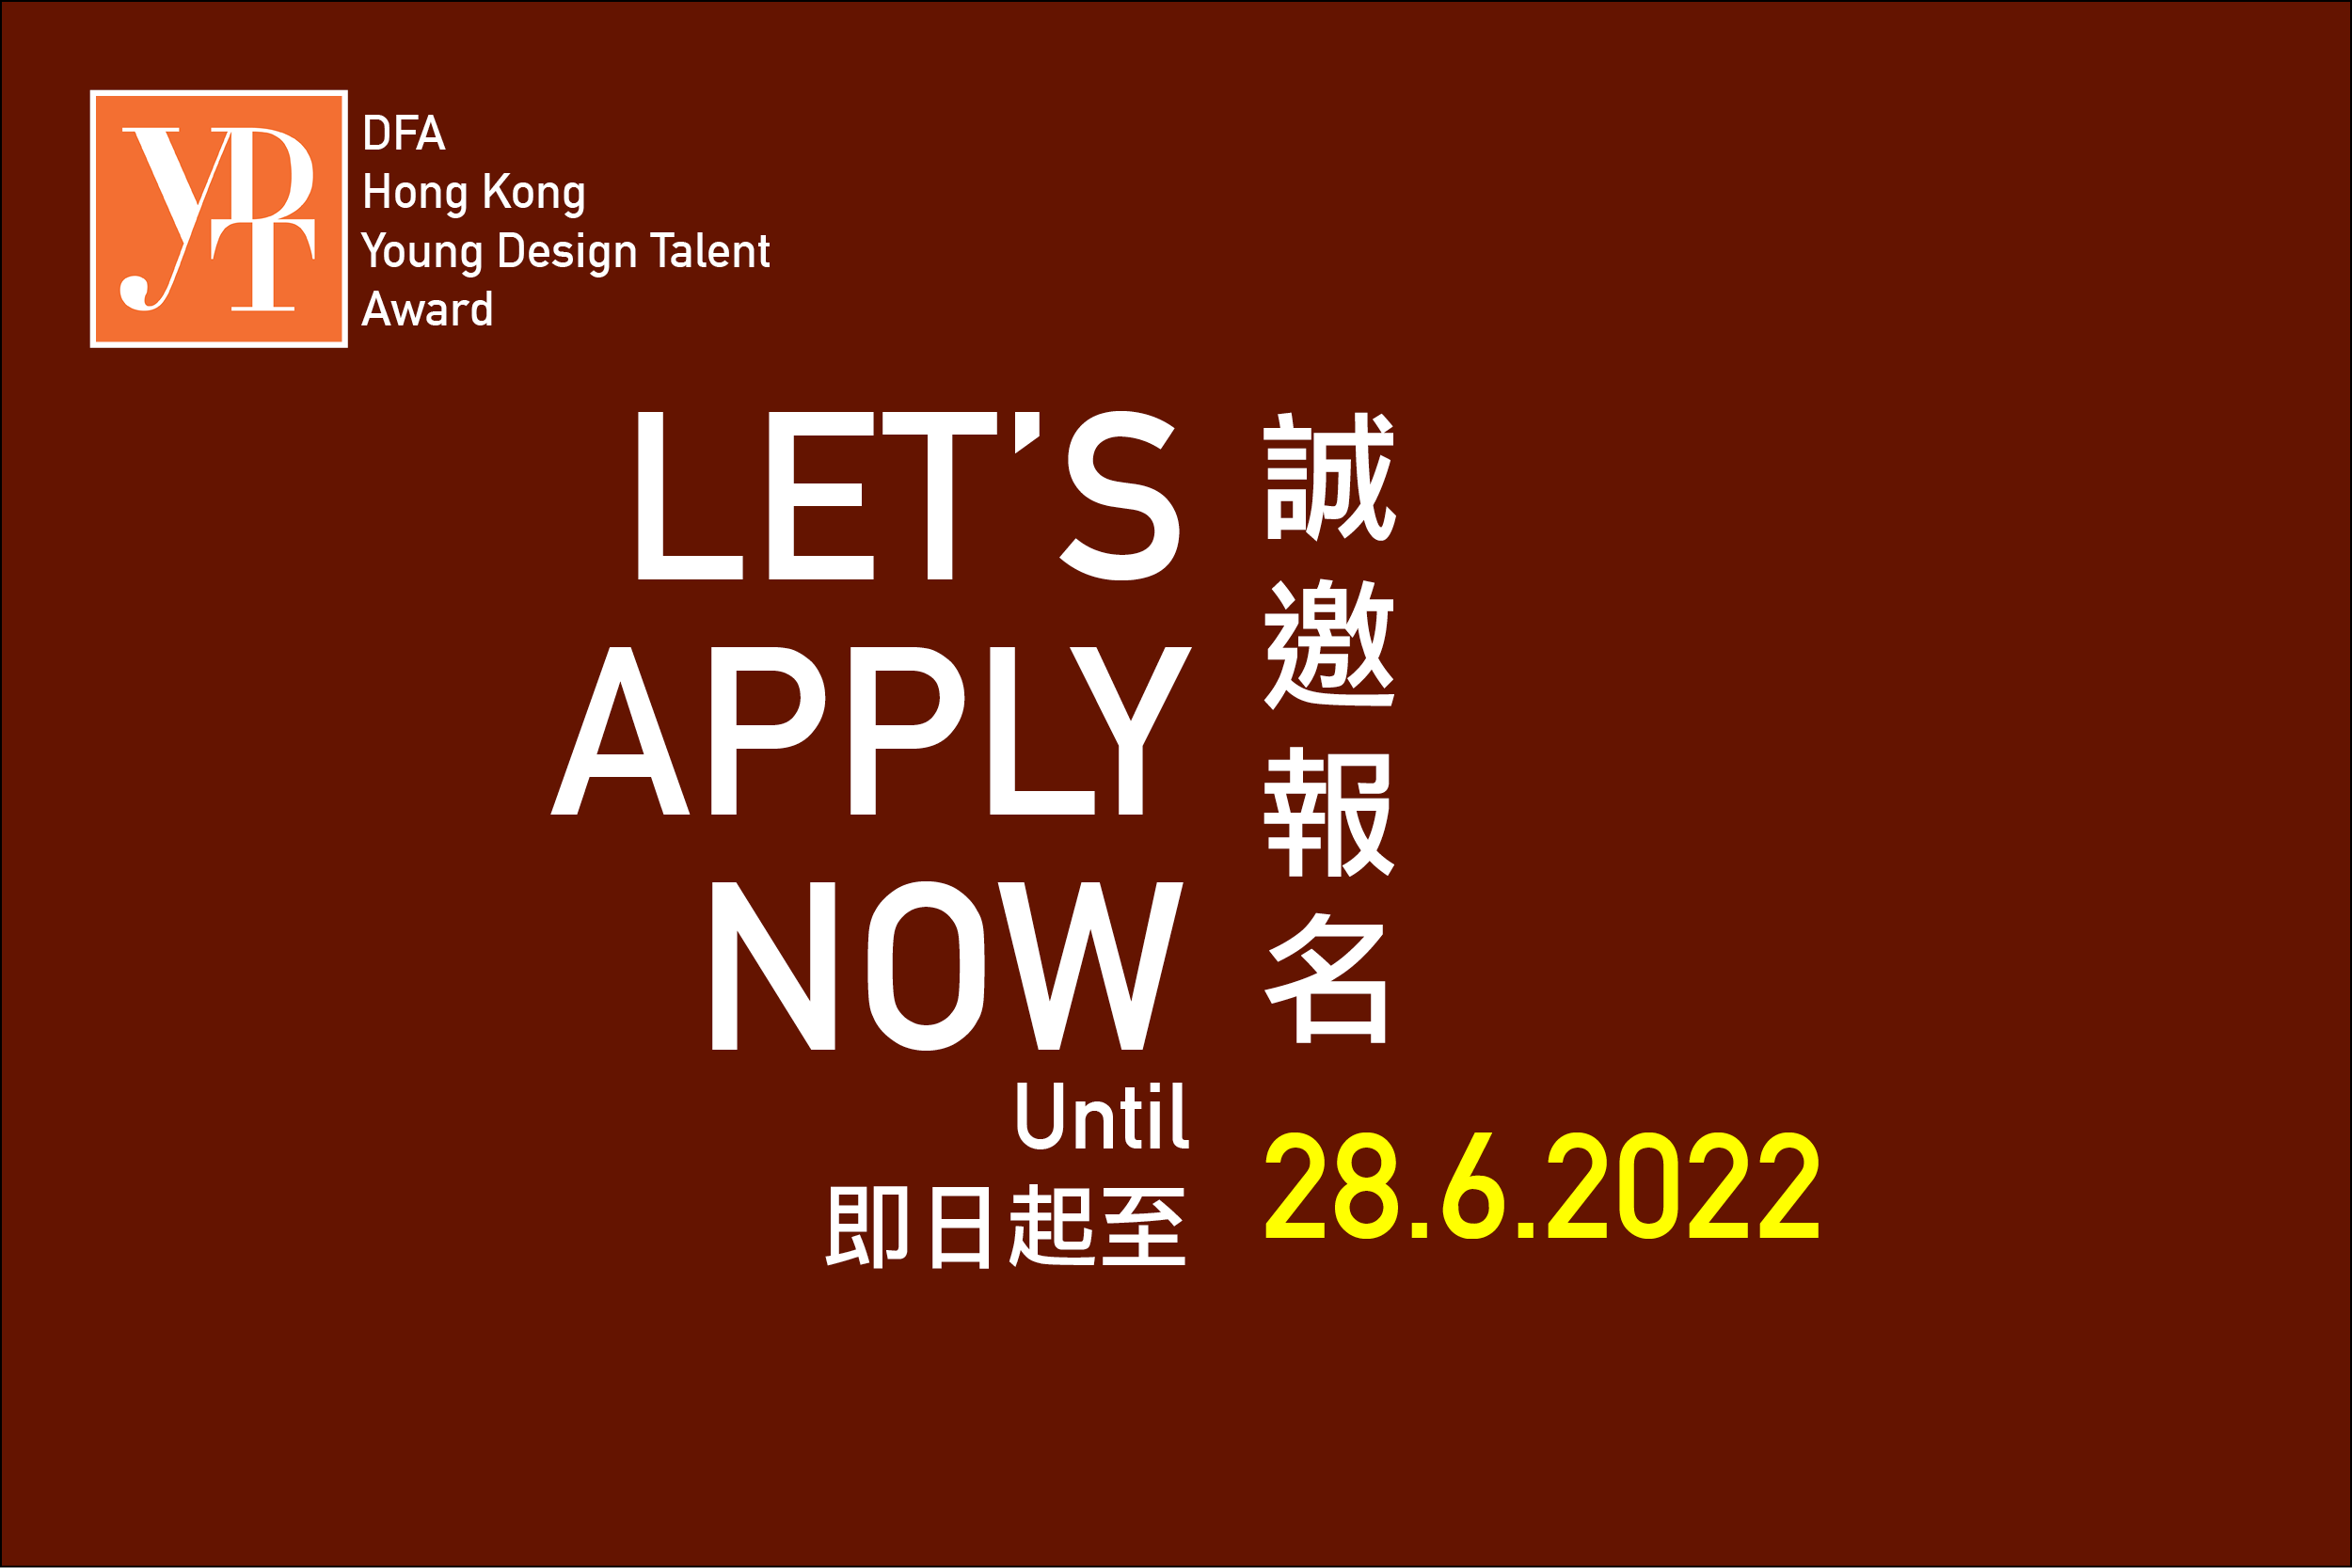 DFA Hong Kong Young Design Talent Award 2022 Applications Open from Now until 28 June